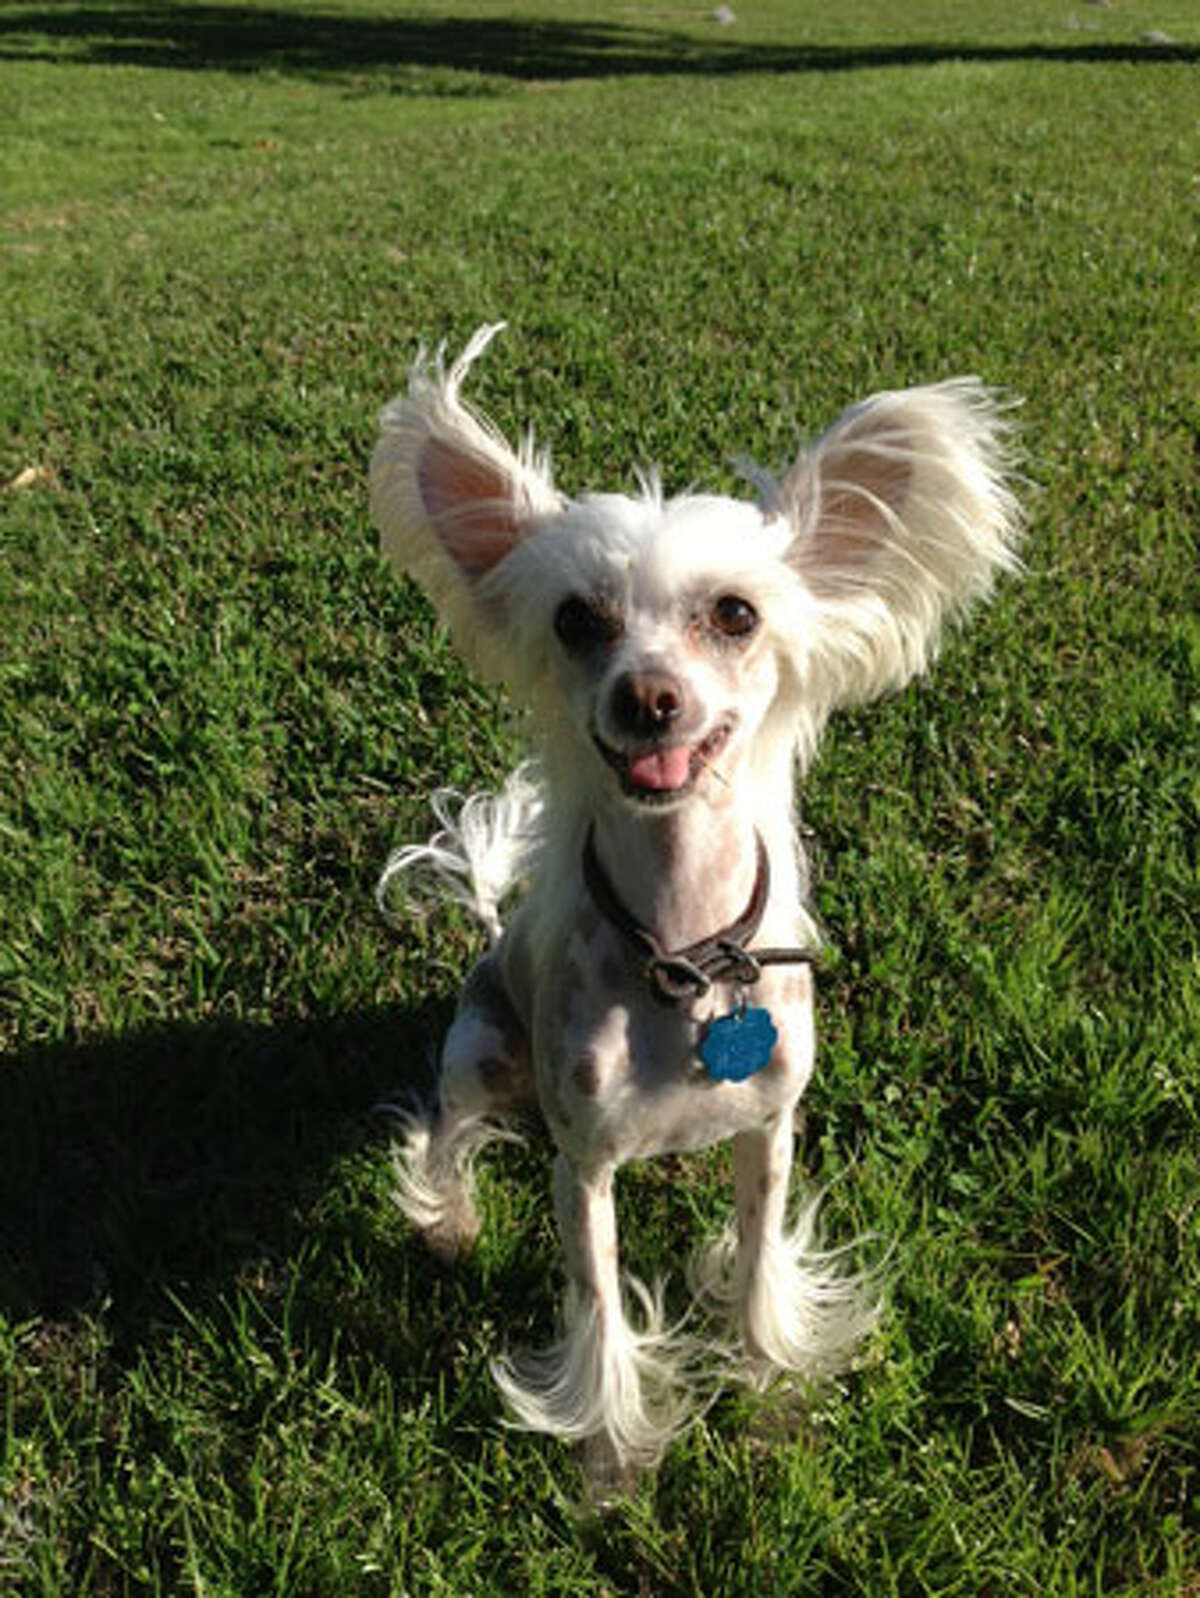 Mowgli, a Chinese Crested, was picked up from a Texas breeder by Kolbe Ricks after the Chinese Crested "puppy" she ordered from an online breeder in Florida turned out to be years old.